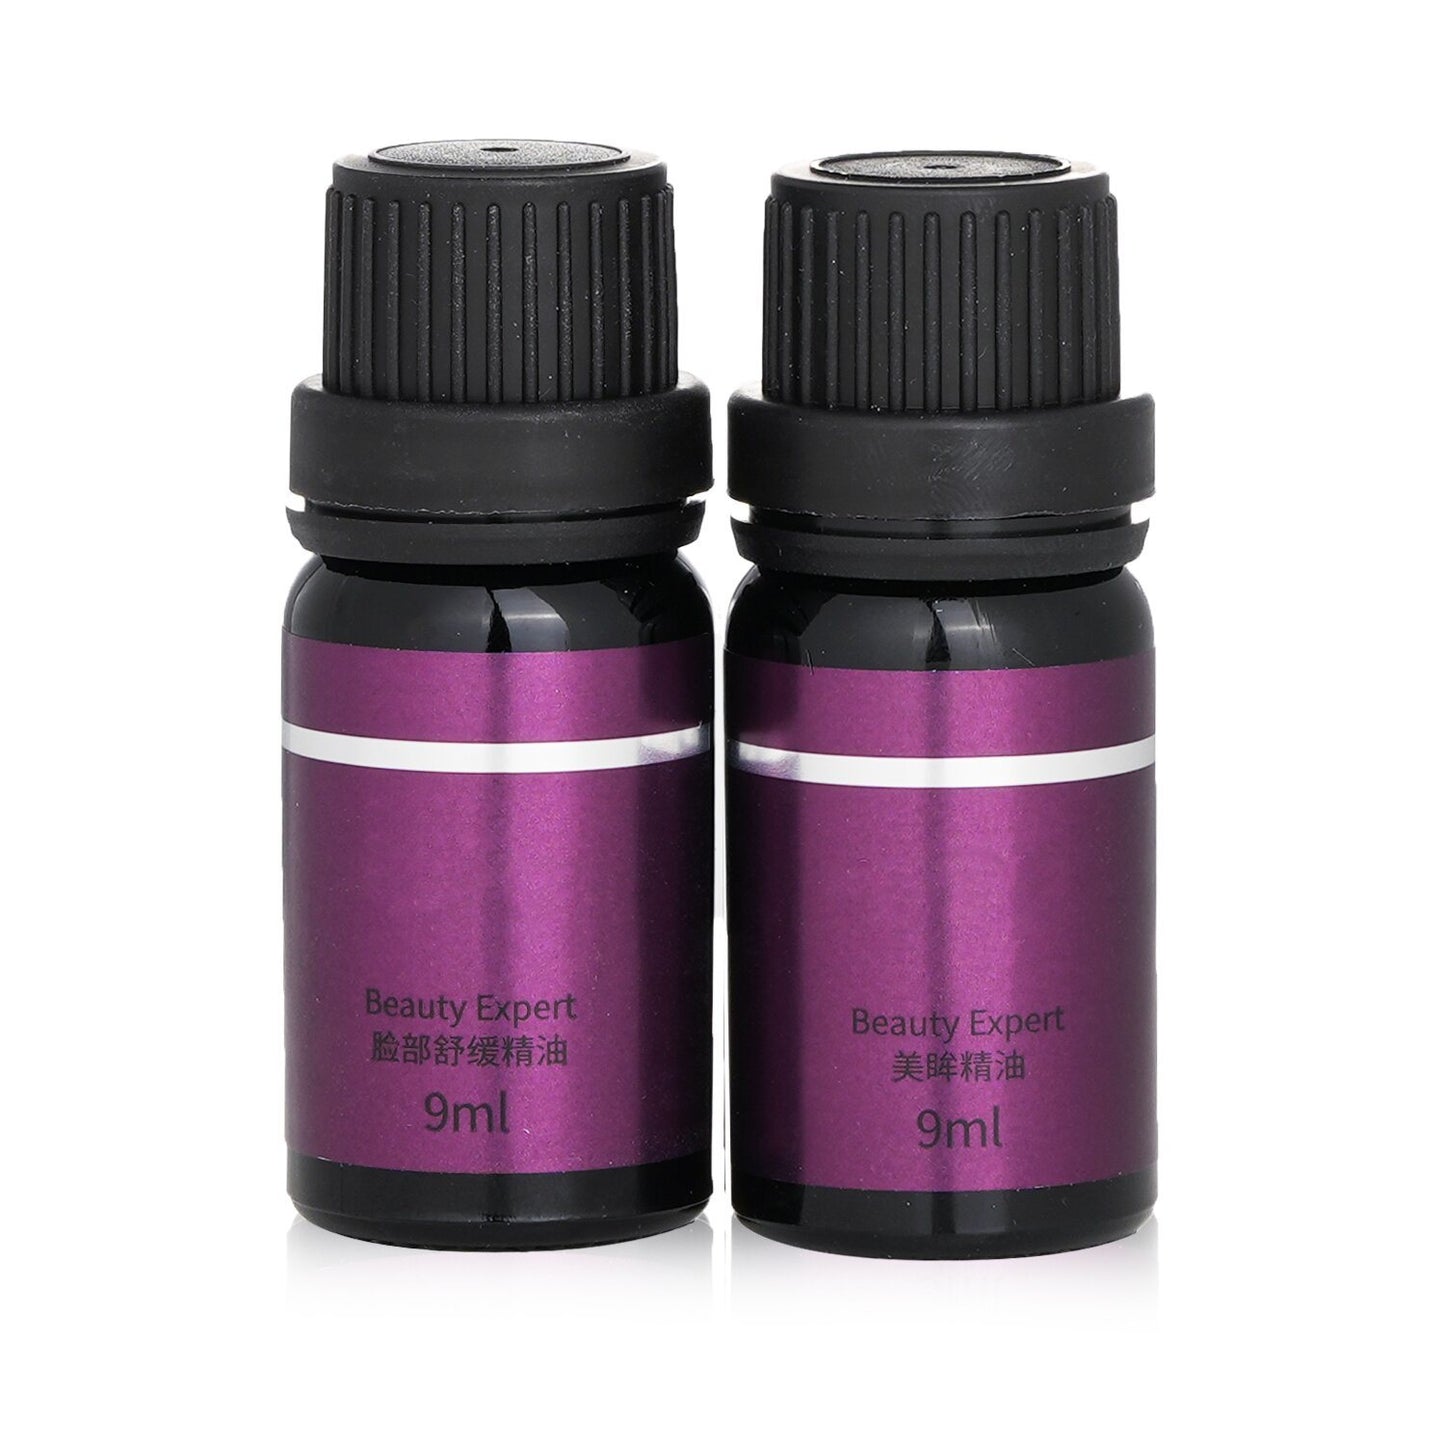 BEAUTY EXPERT BY NATURAL BEAUTY - Essential Oil Value Set: (1x Purifying Essential Oil + 1x Soothing Essential Oil) 580960+580953 2x9ml/0.3oz - lolaluxeshop